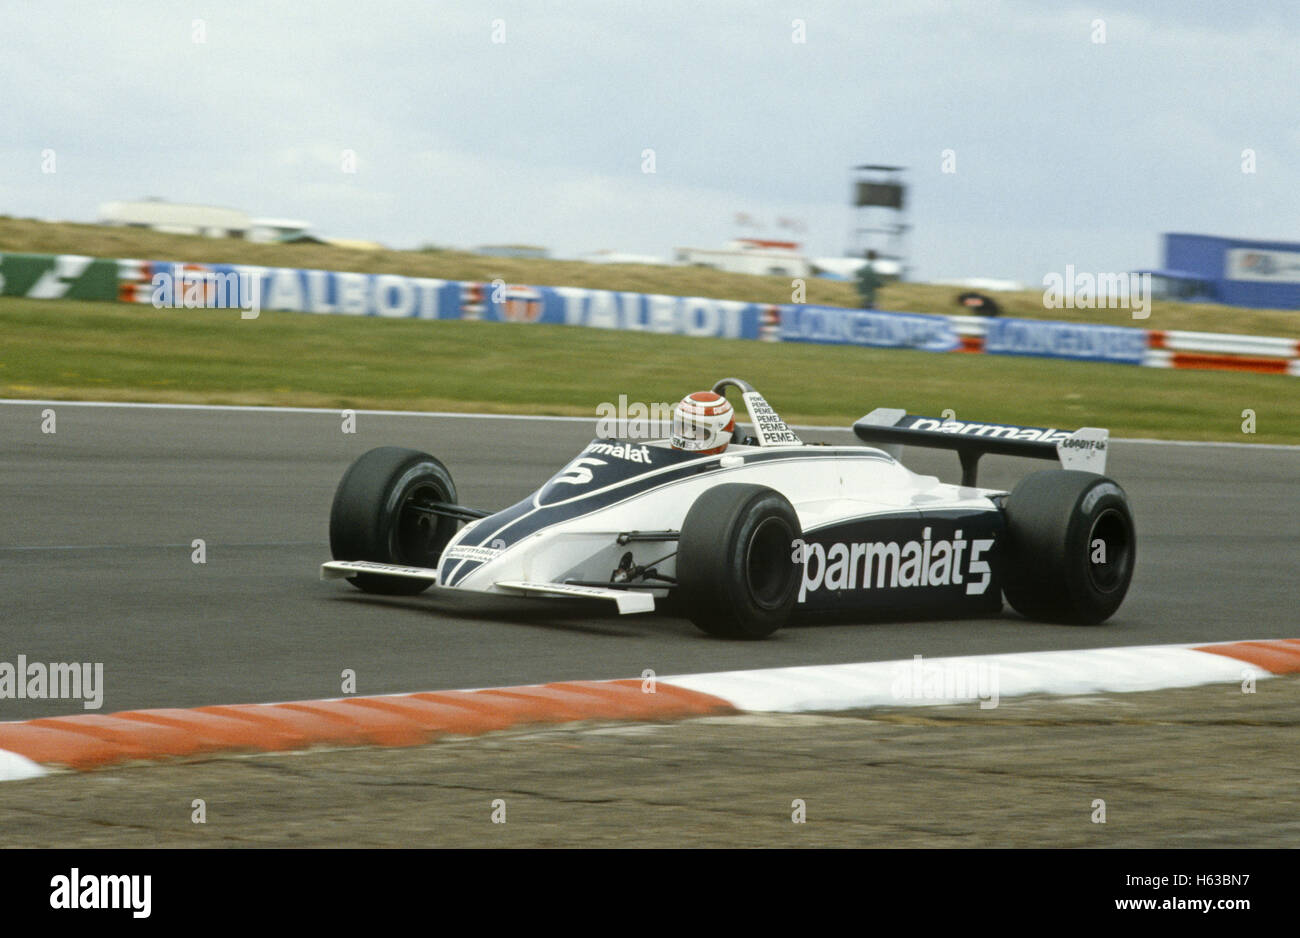 5  Nelson Piquet in a Brabham Cosworth finished 2nd in the British GP 13 July 1980 Stock Photo